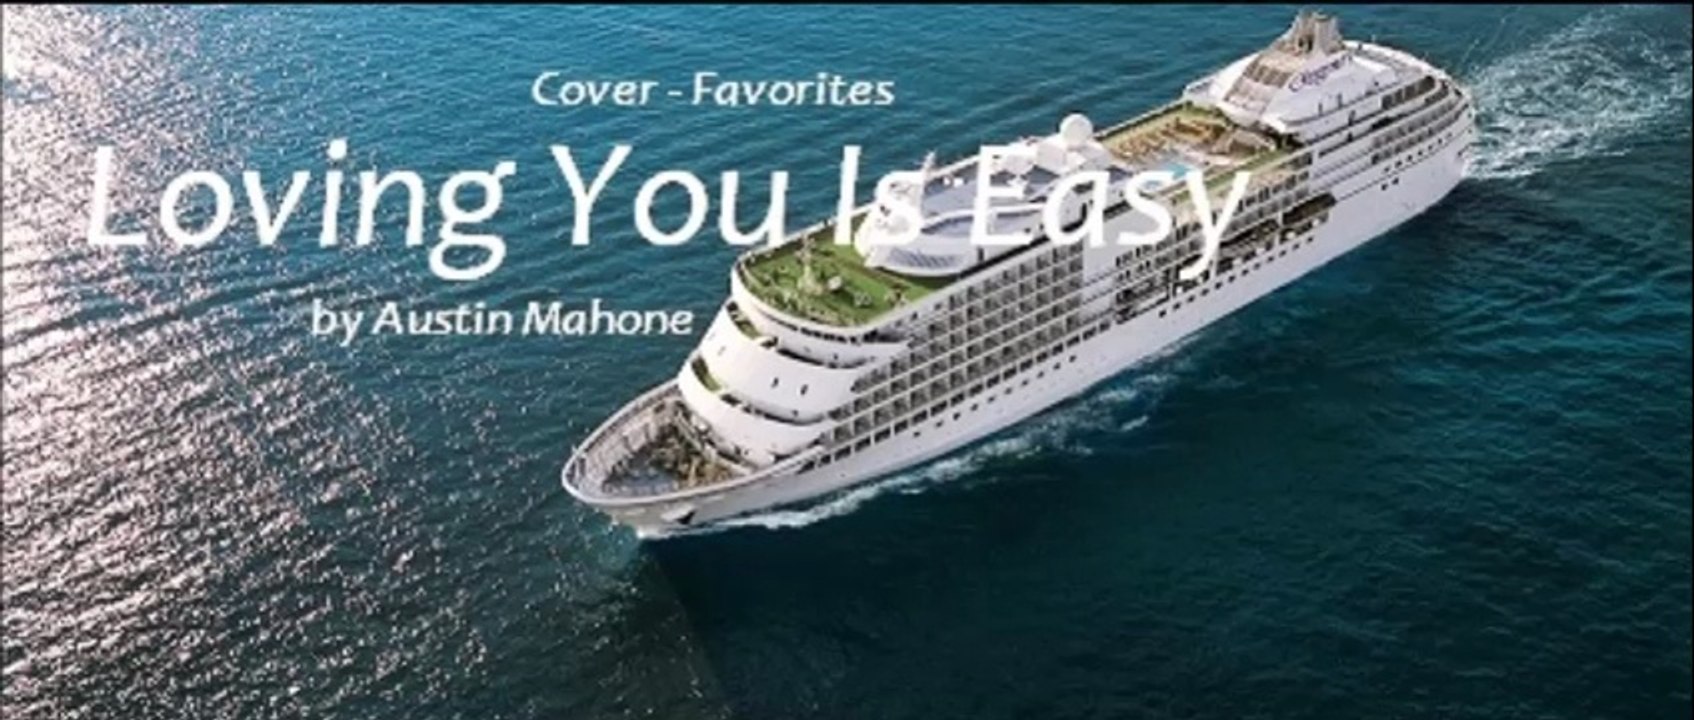 Loving You Is Easy by Austin Mahone (Cover - Favorites)